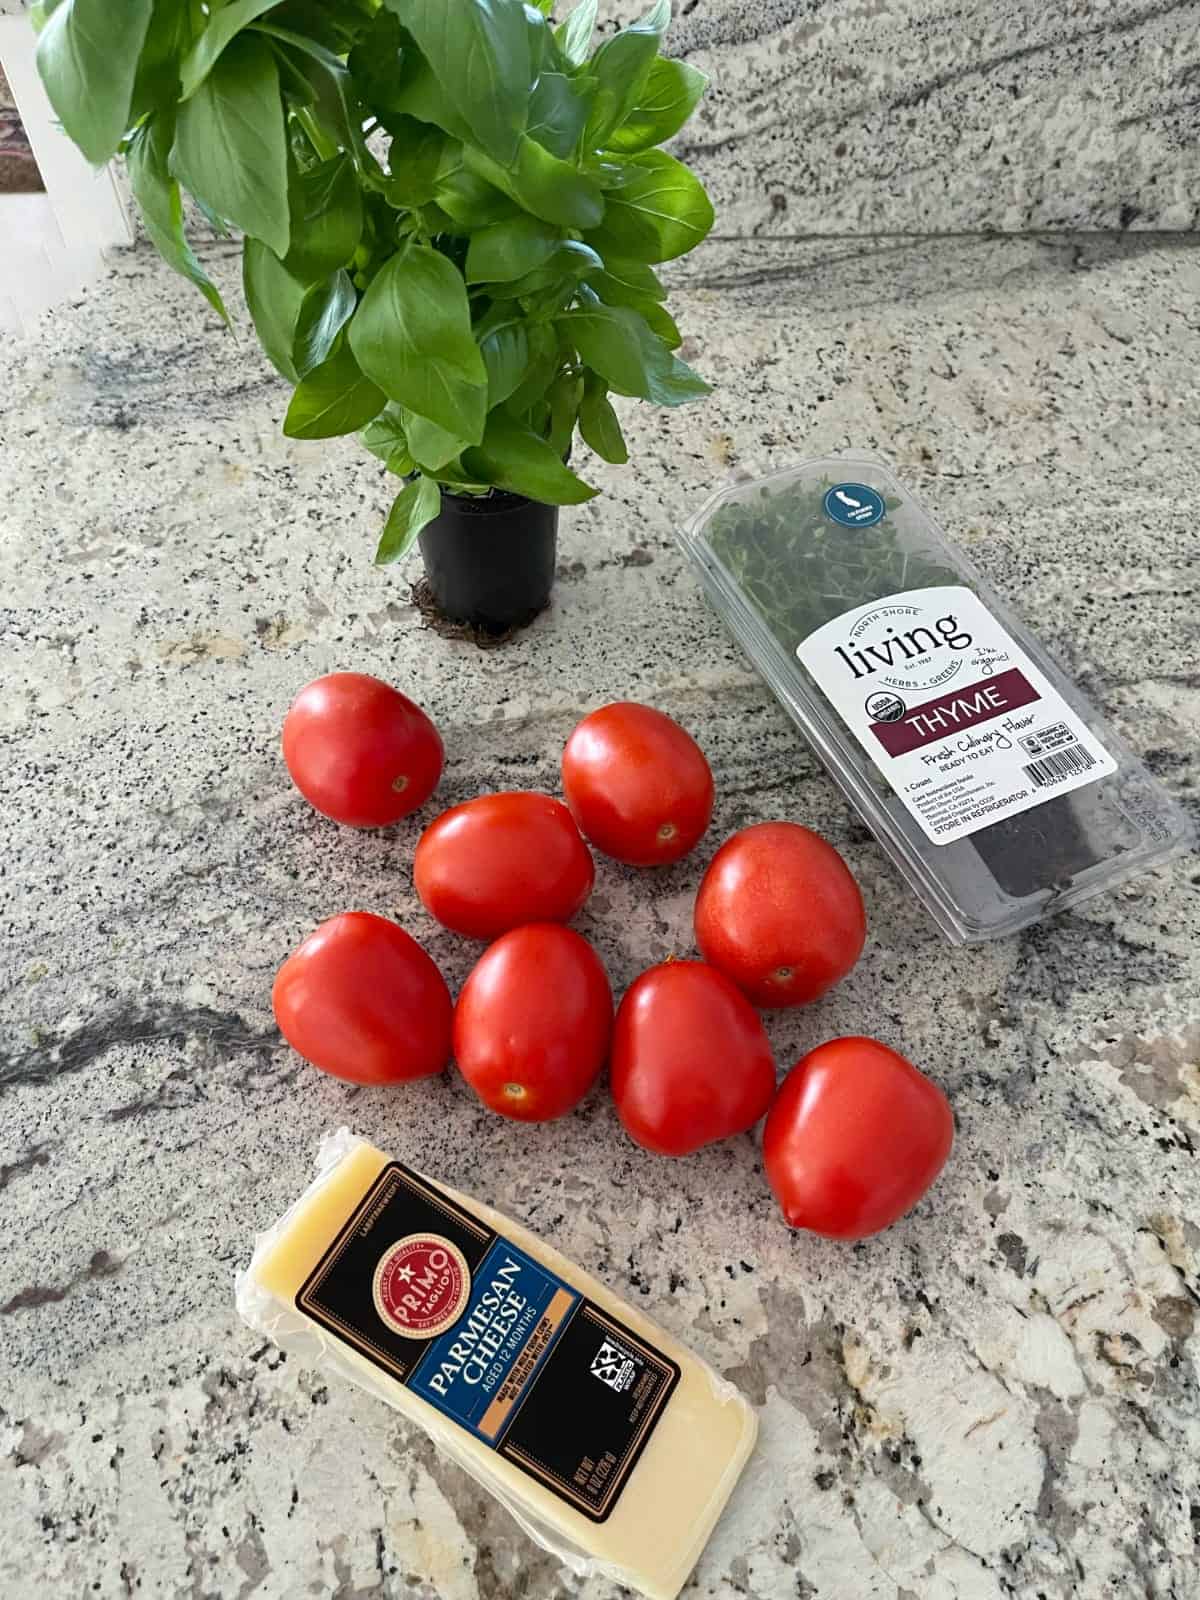 Ingredients including basil plant, package of fresh thyme, Romat tomatoes and Parmesan cheese on granite.